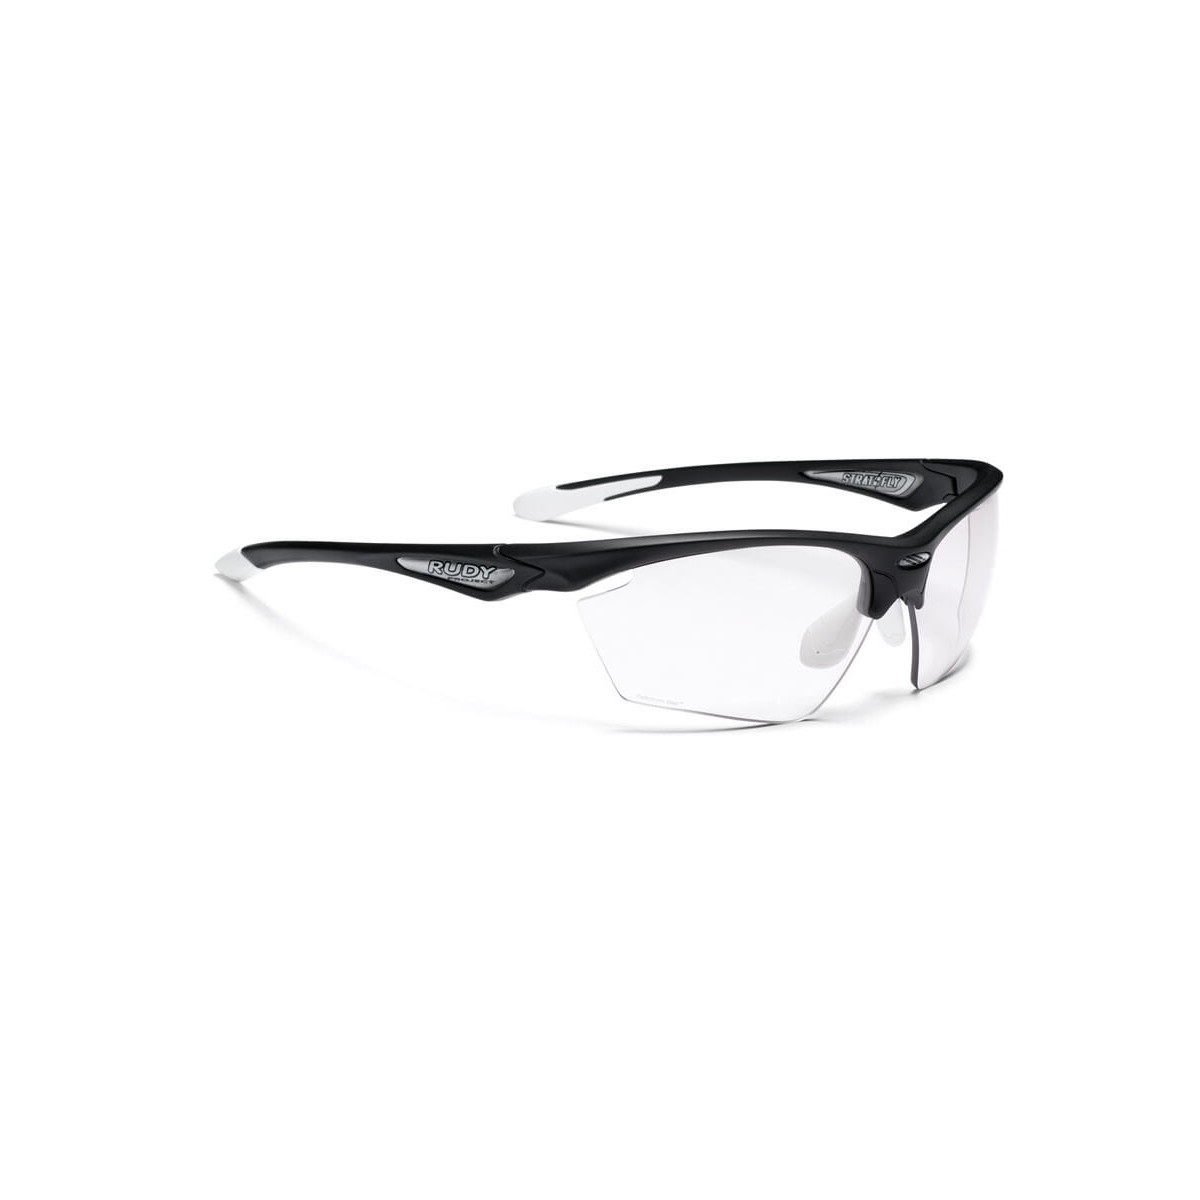 Image of Brille Stratofly Black Gloss RPO Photoclear Rudy Project